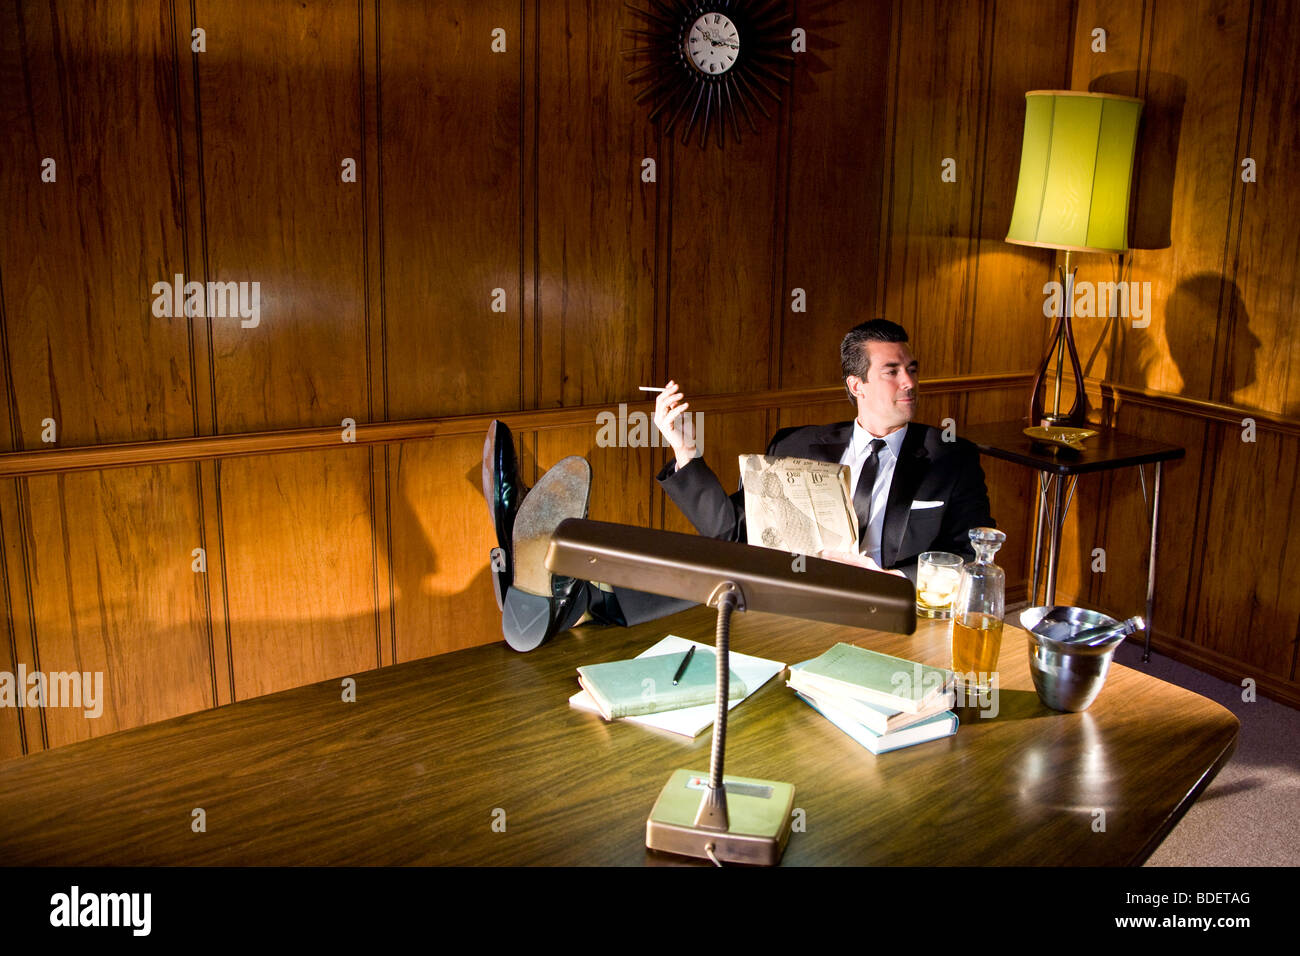 Vintage portrait of businessman relaxing with feet up smoking Stock Photo